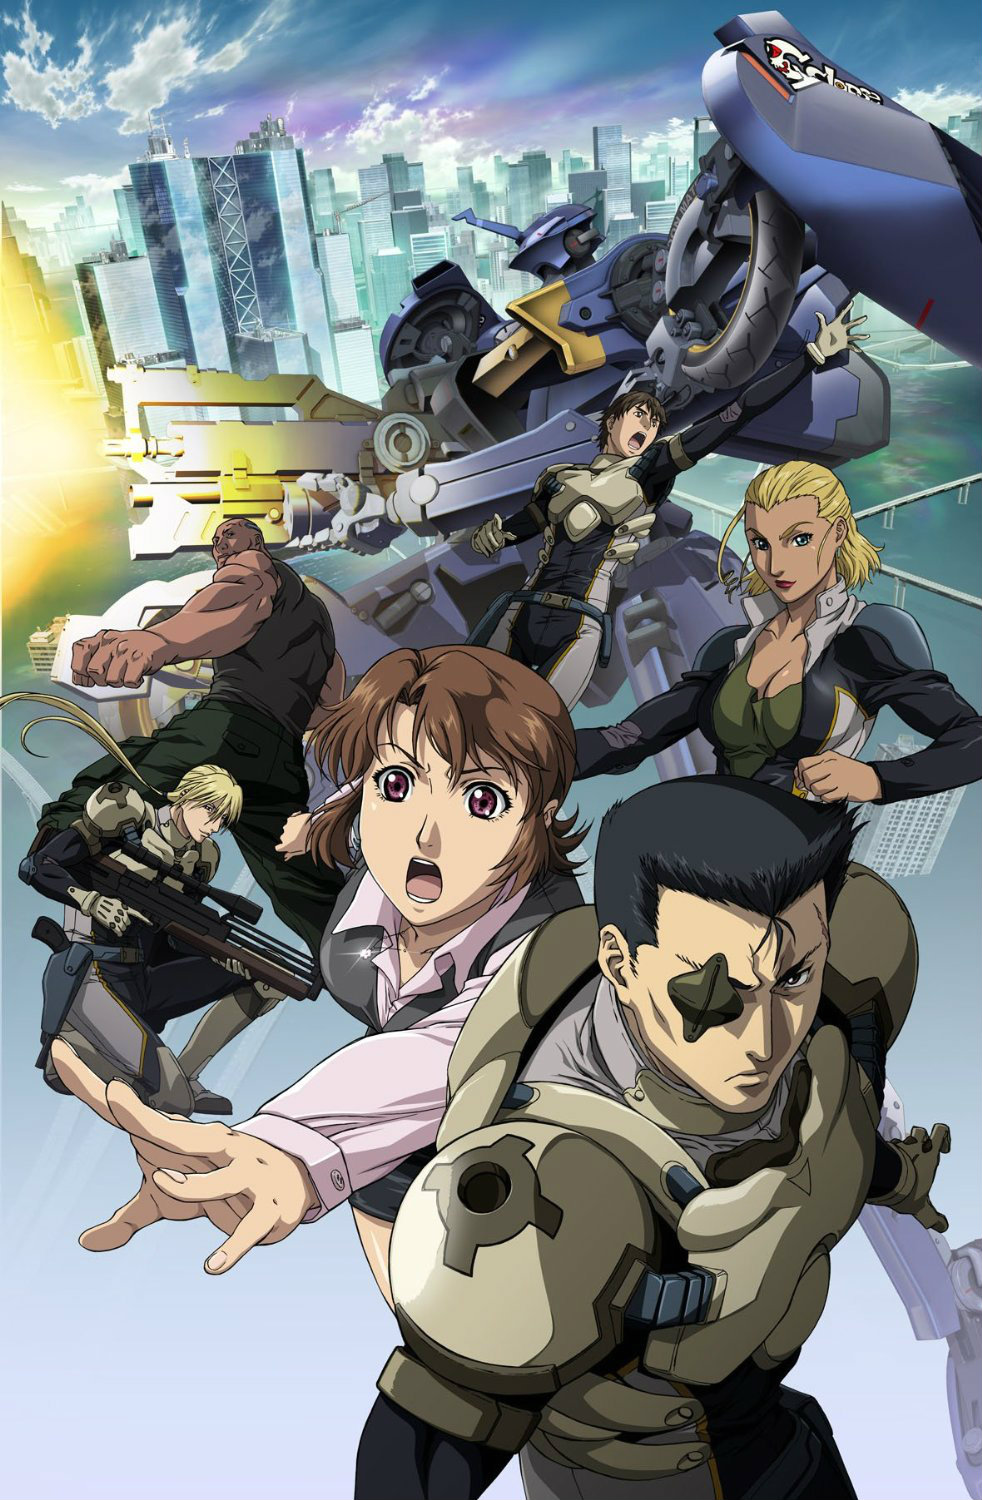 2girls 4boys armor blonde_hair brown_hair bullpup character_request cityscape dark_skin eyepatch firing gun highres manly mecha multiple_boys multiple_girls muscle official_art pilot_suit promotional_art rifle science_fiction sniper_rifle tagme uniform viper's_creed walther walther_wa_2000 weapon